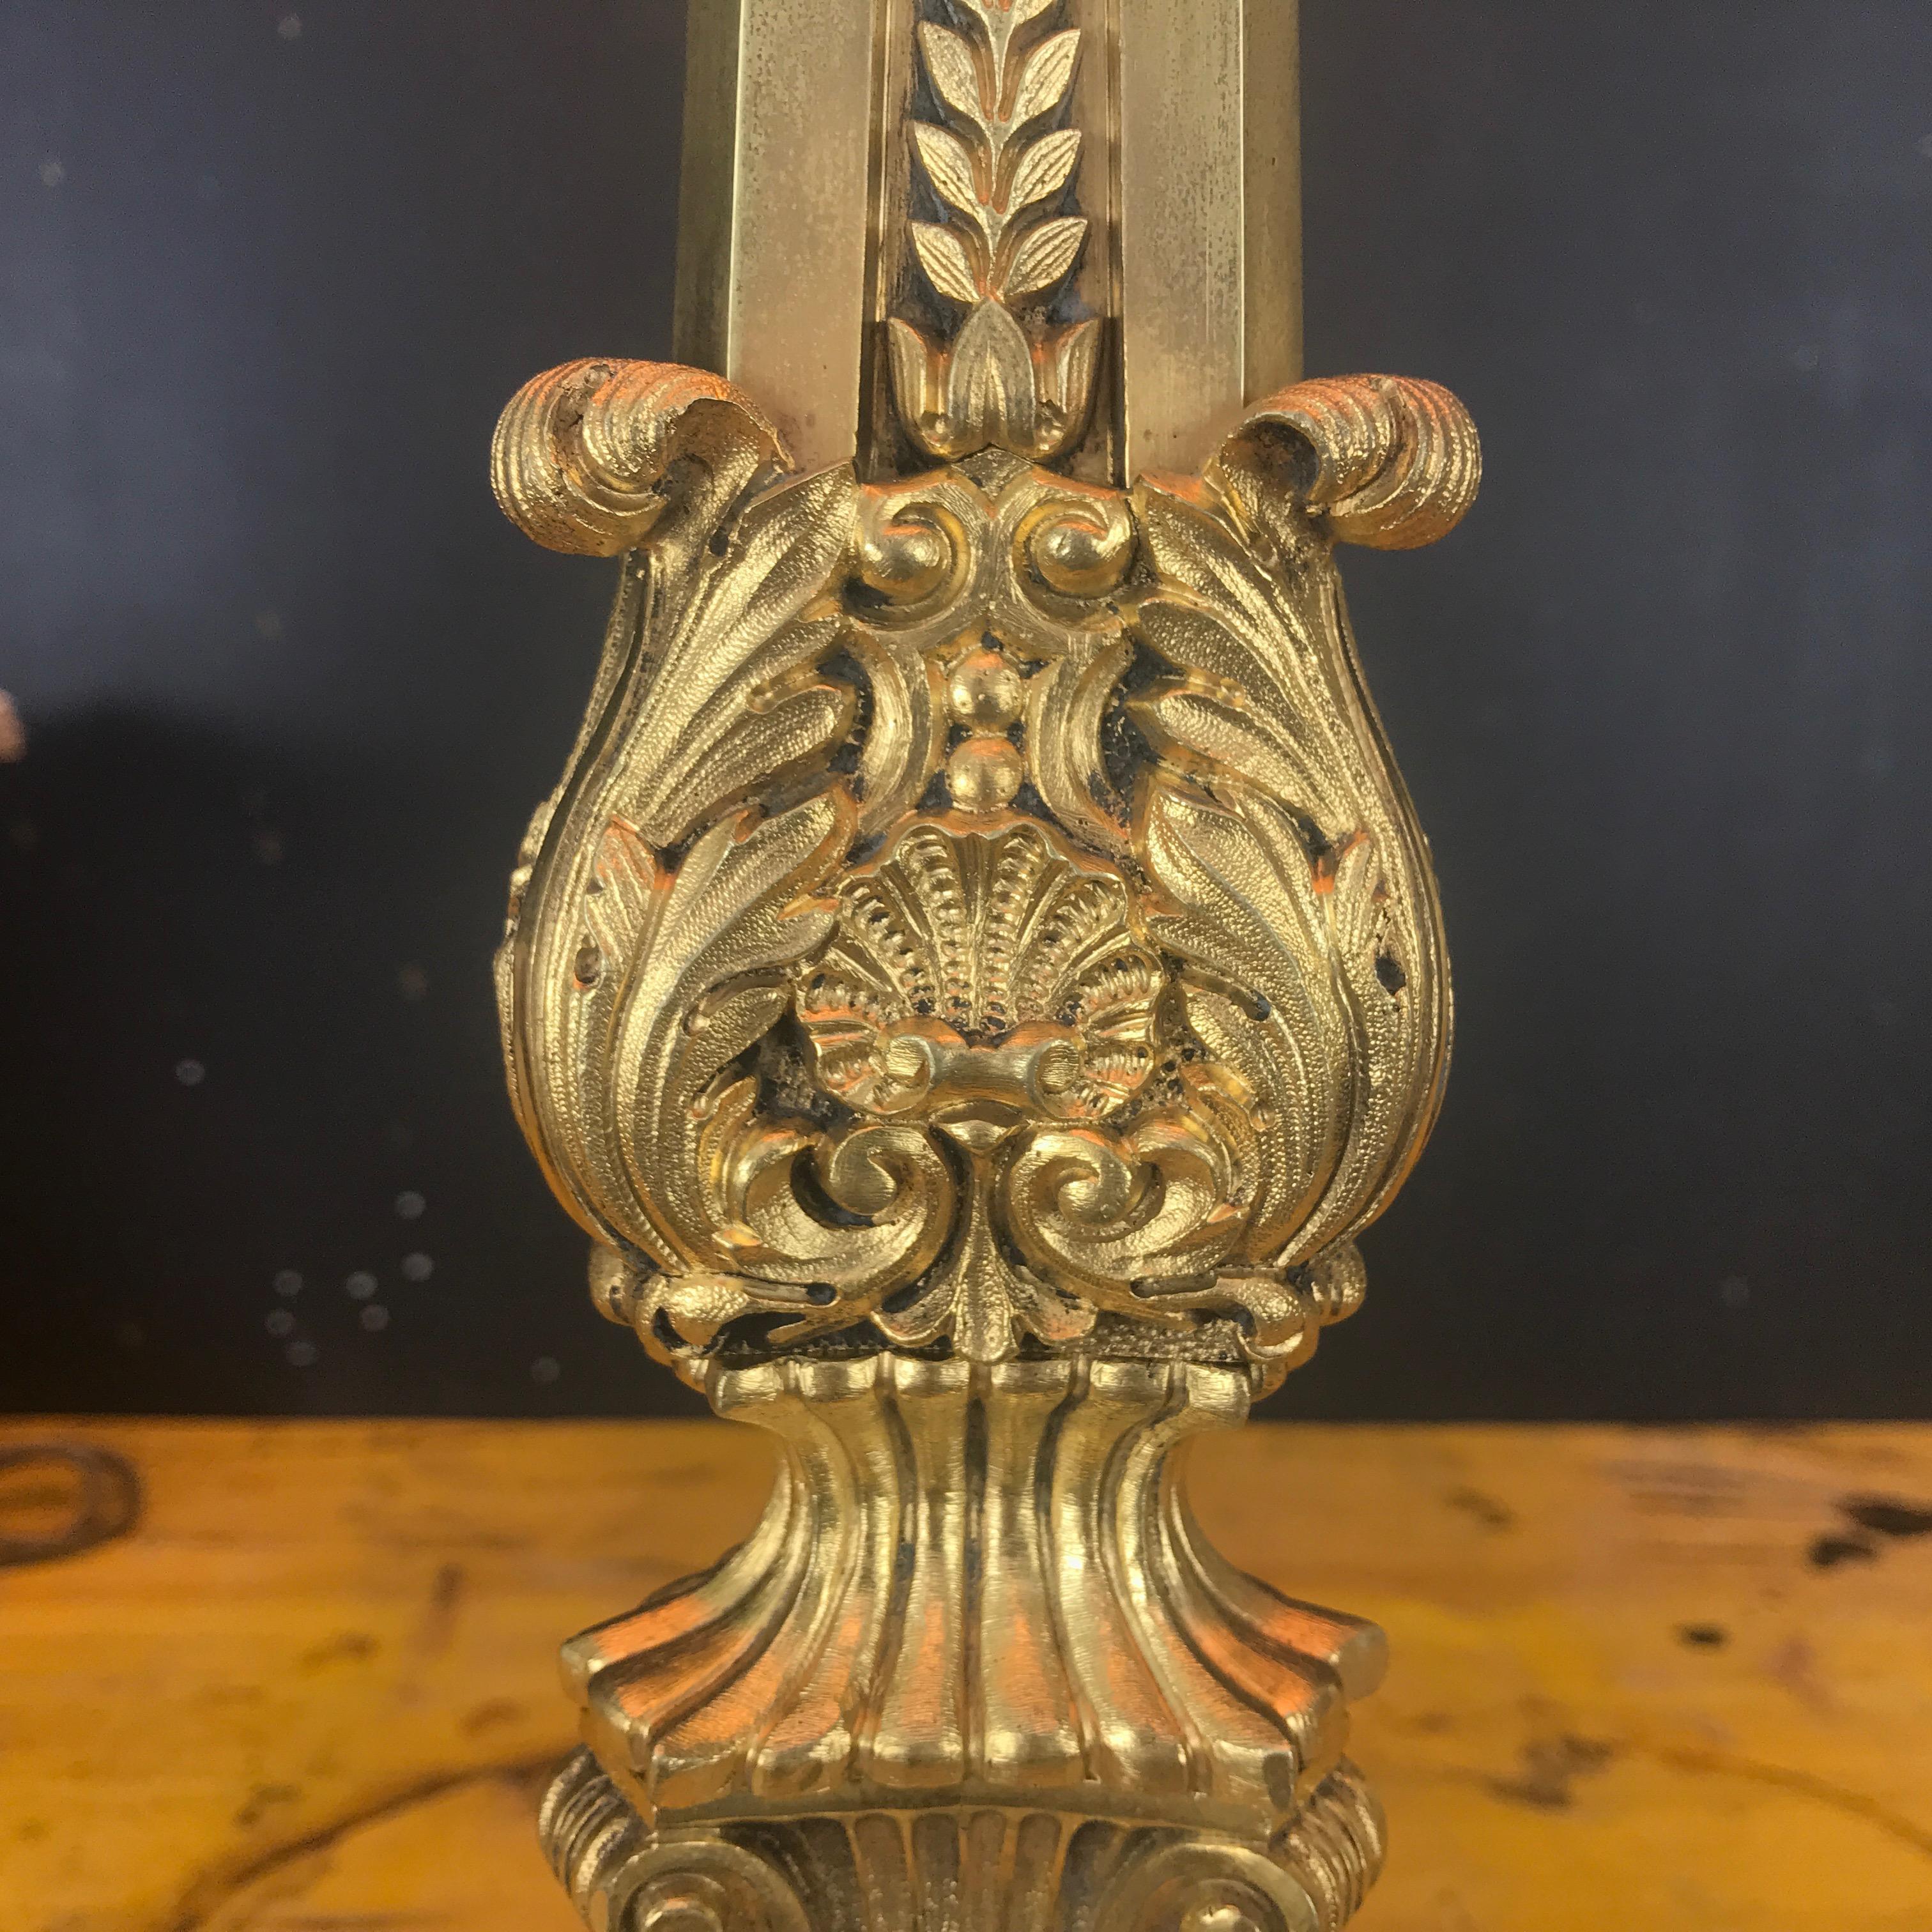 Empire Mid-20th Century French Ormolu Table Lamp Five-Arm Candelabra